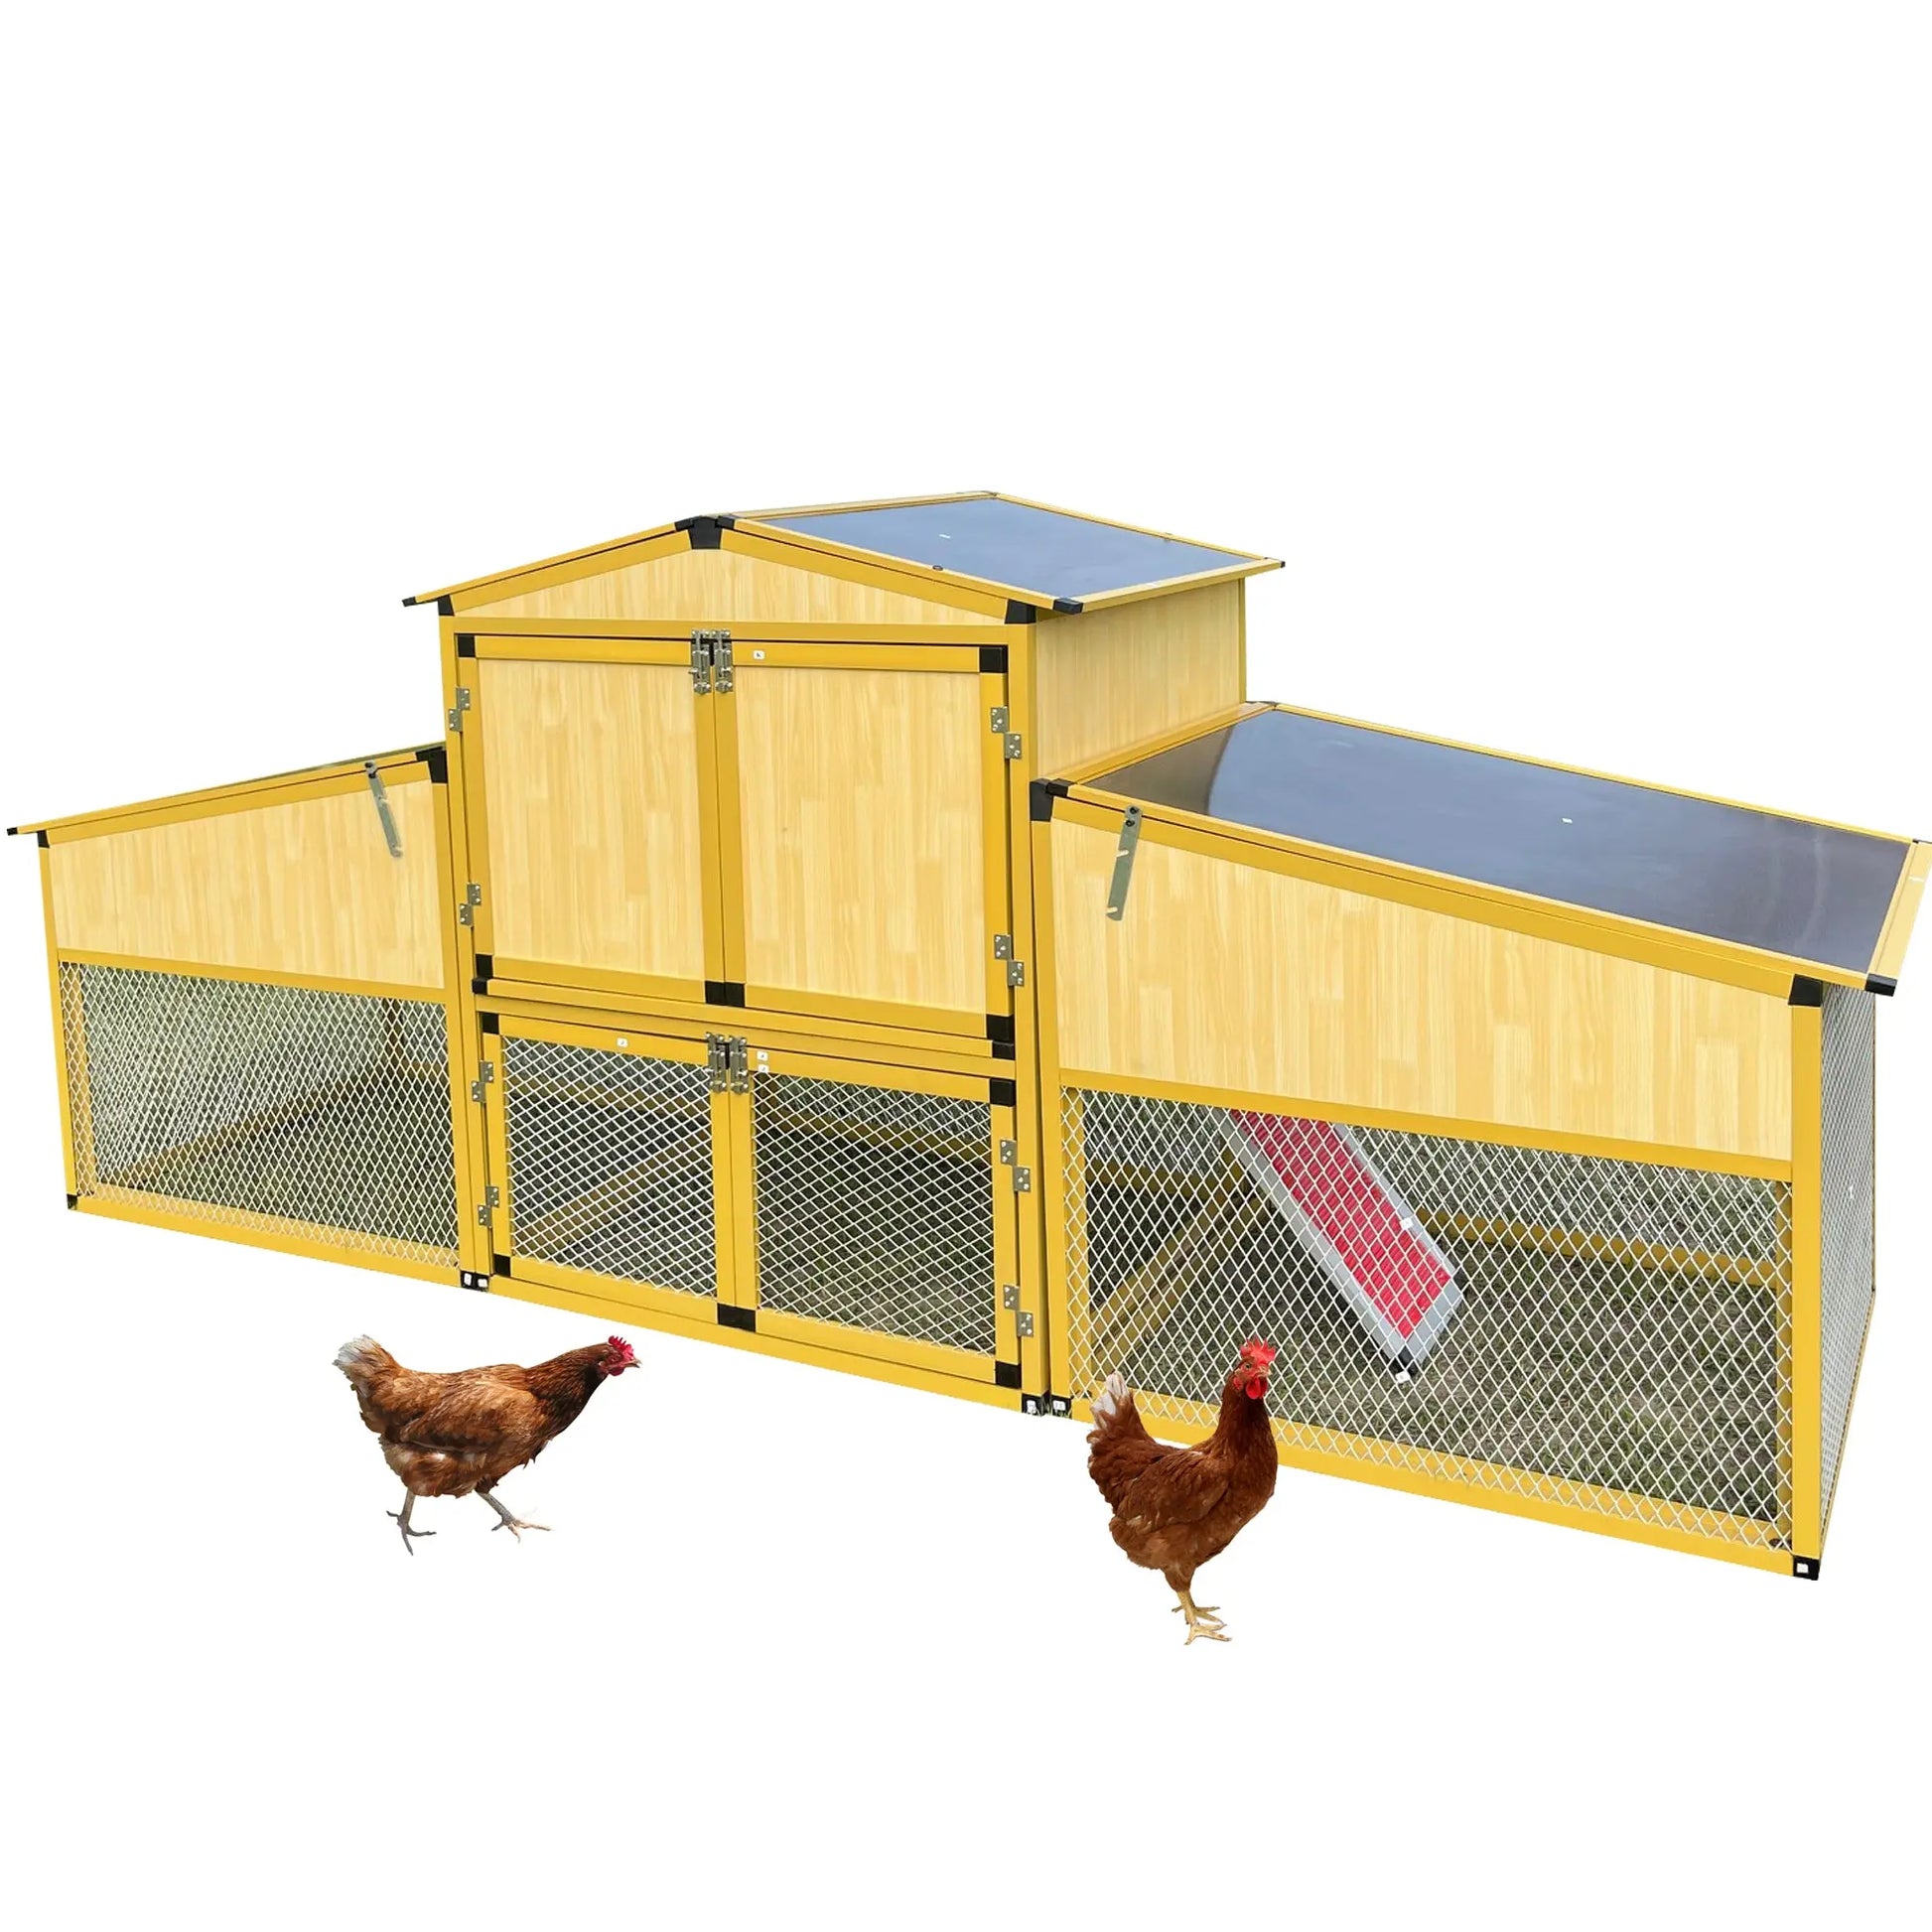 Talis-us Large Chicken Coop Poultry Cage with Nesting Box Run Talis Us